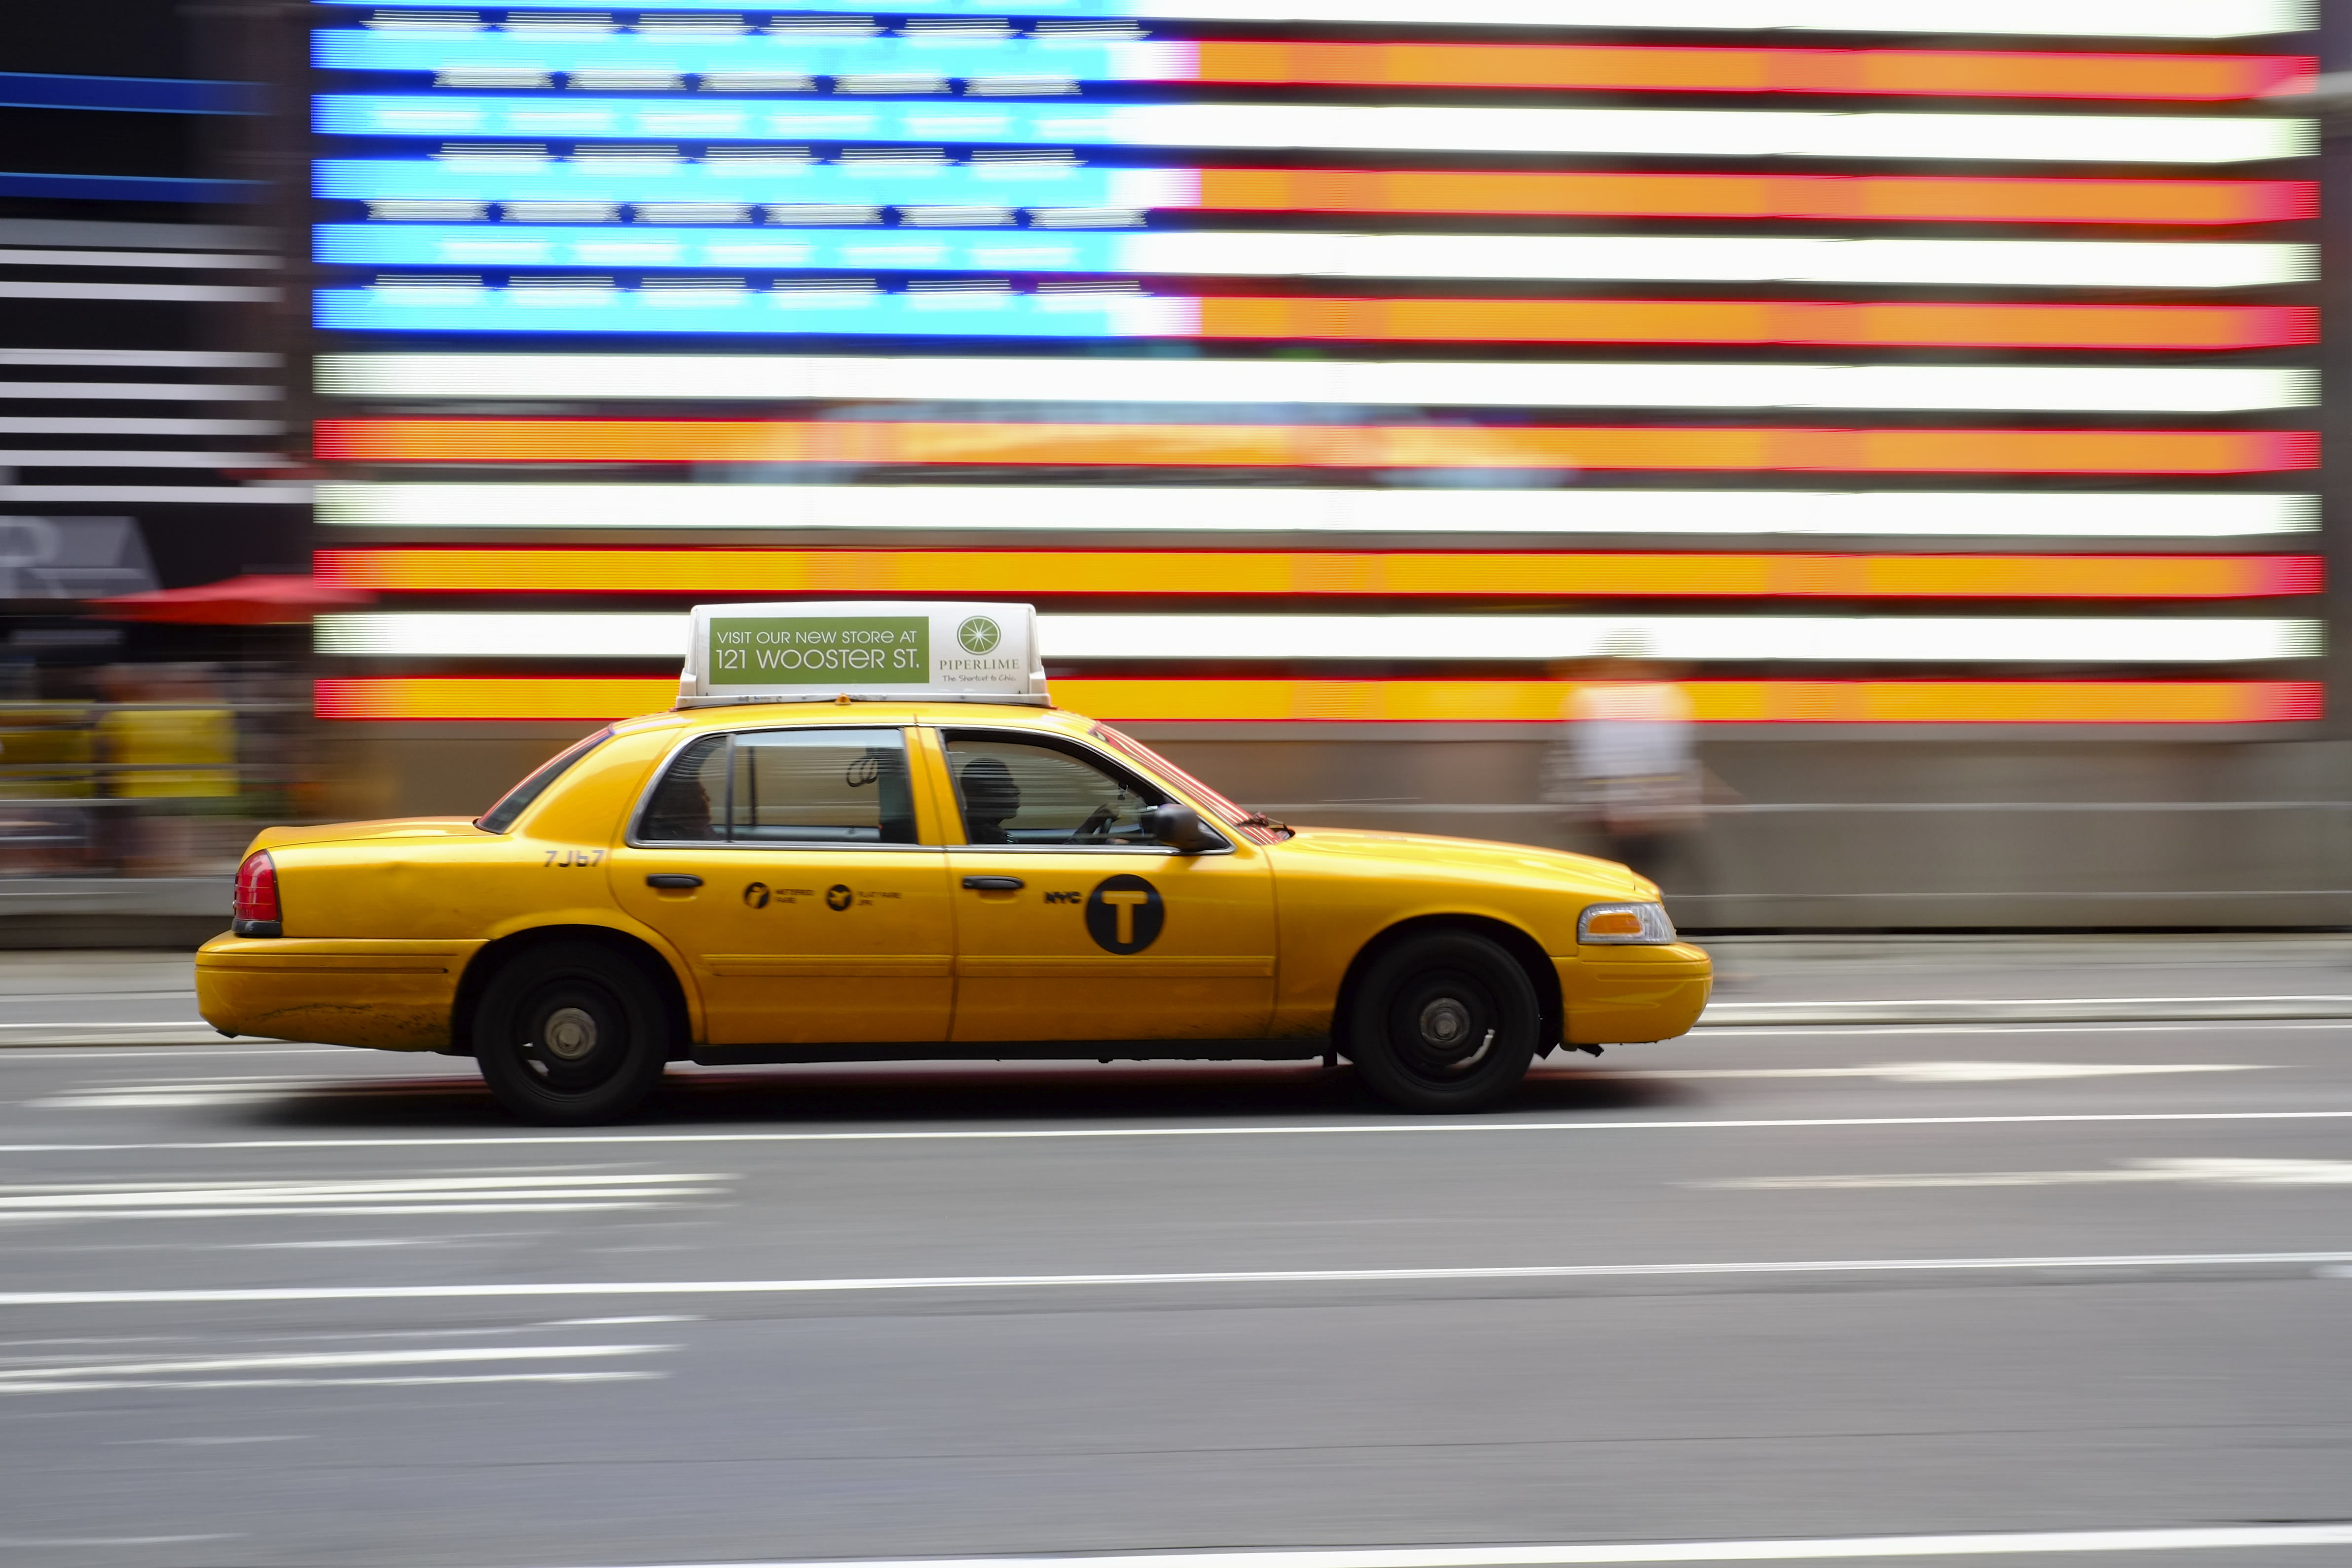 NYC_taxi - compressed